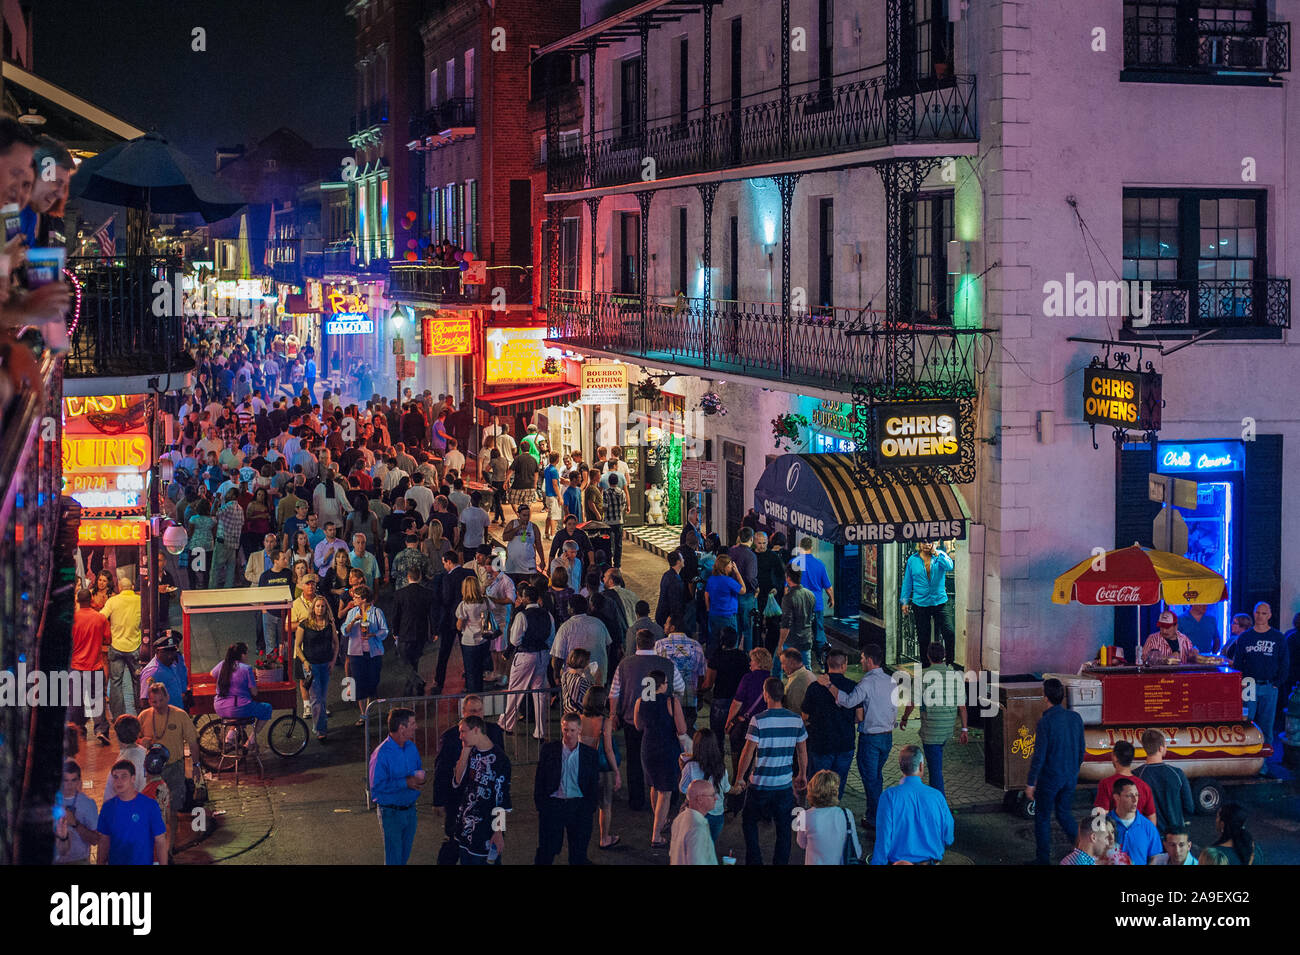 Bourbon Street by night in New Orleans. This historic street in the